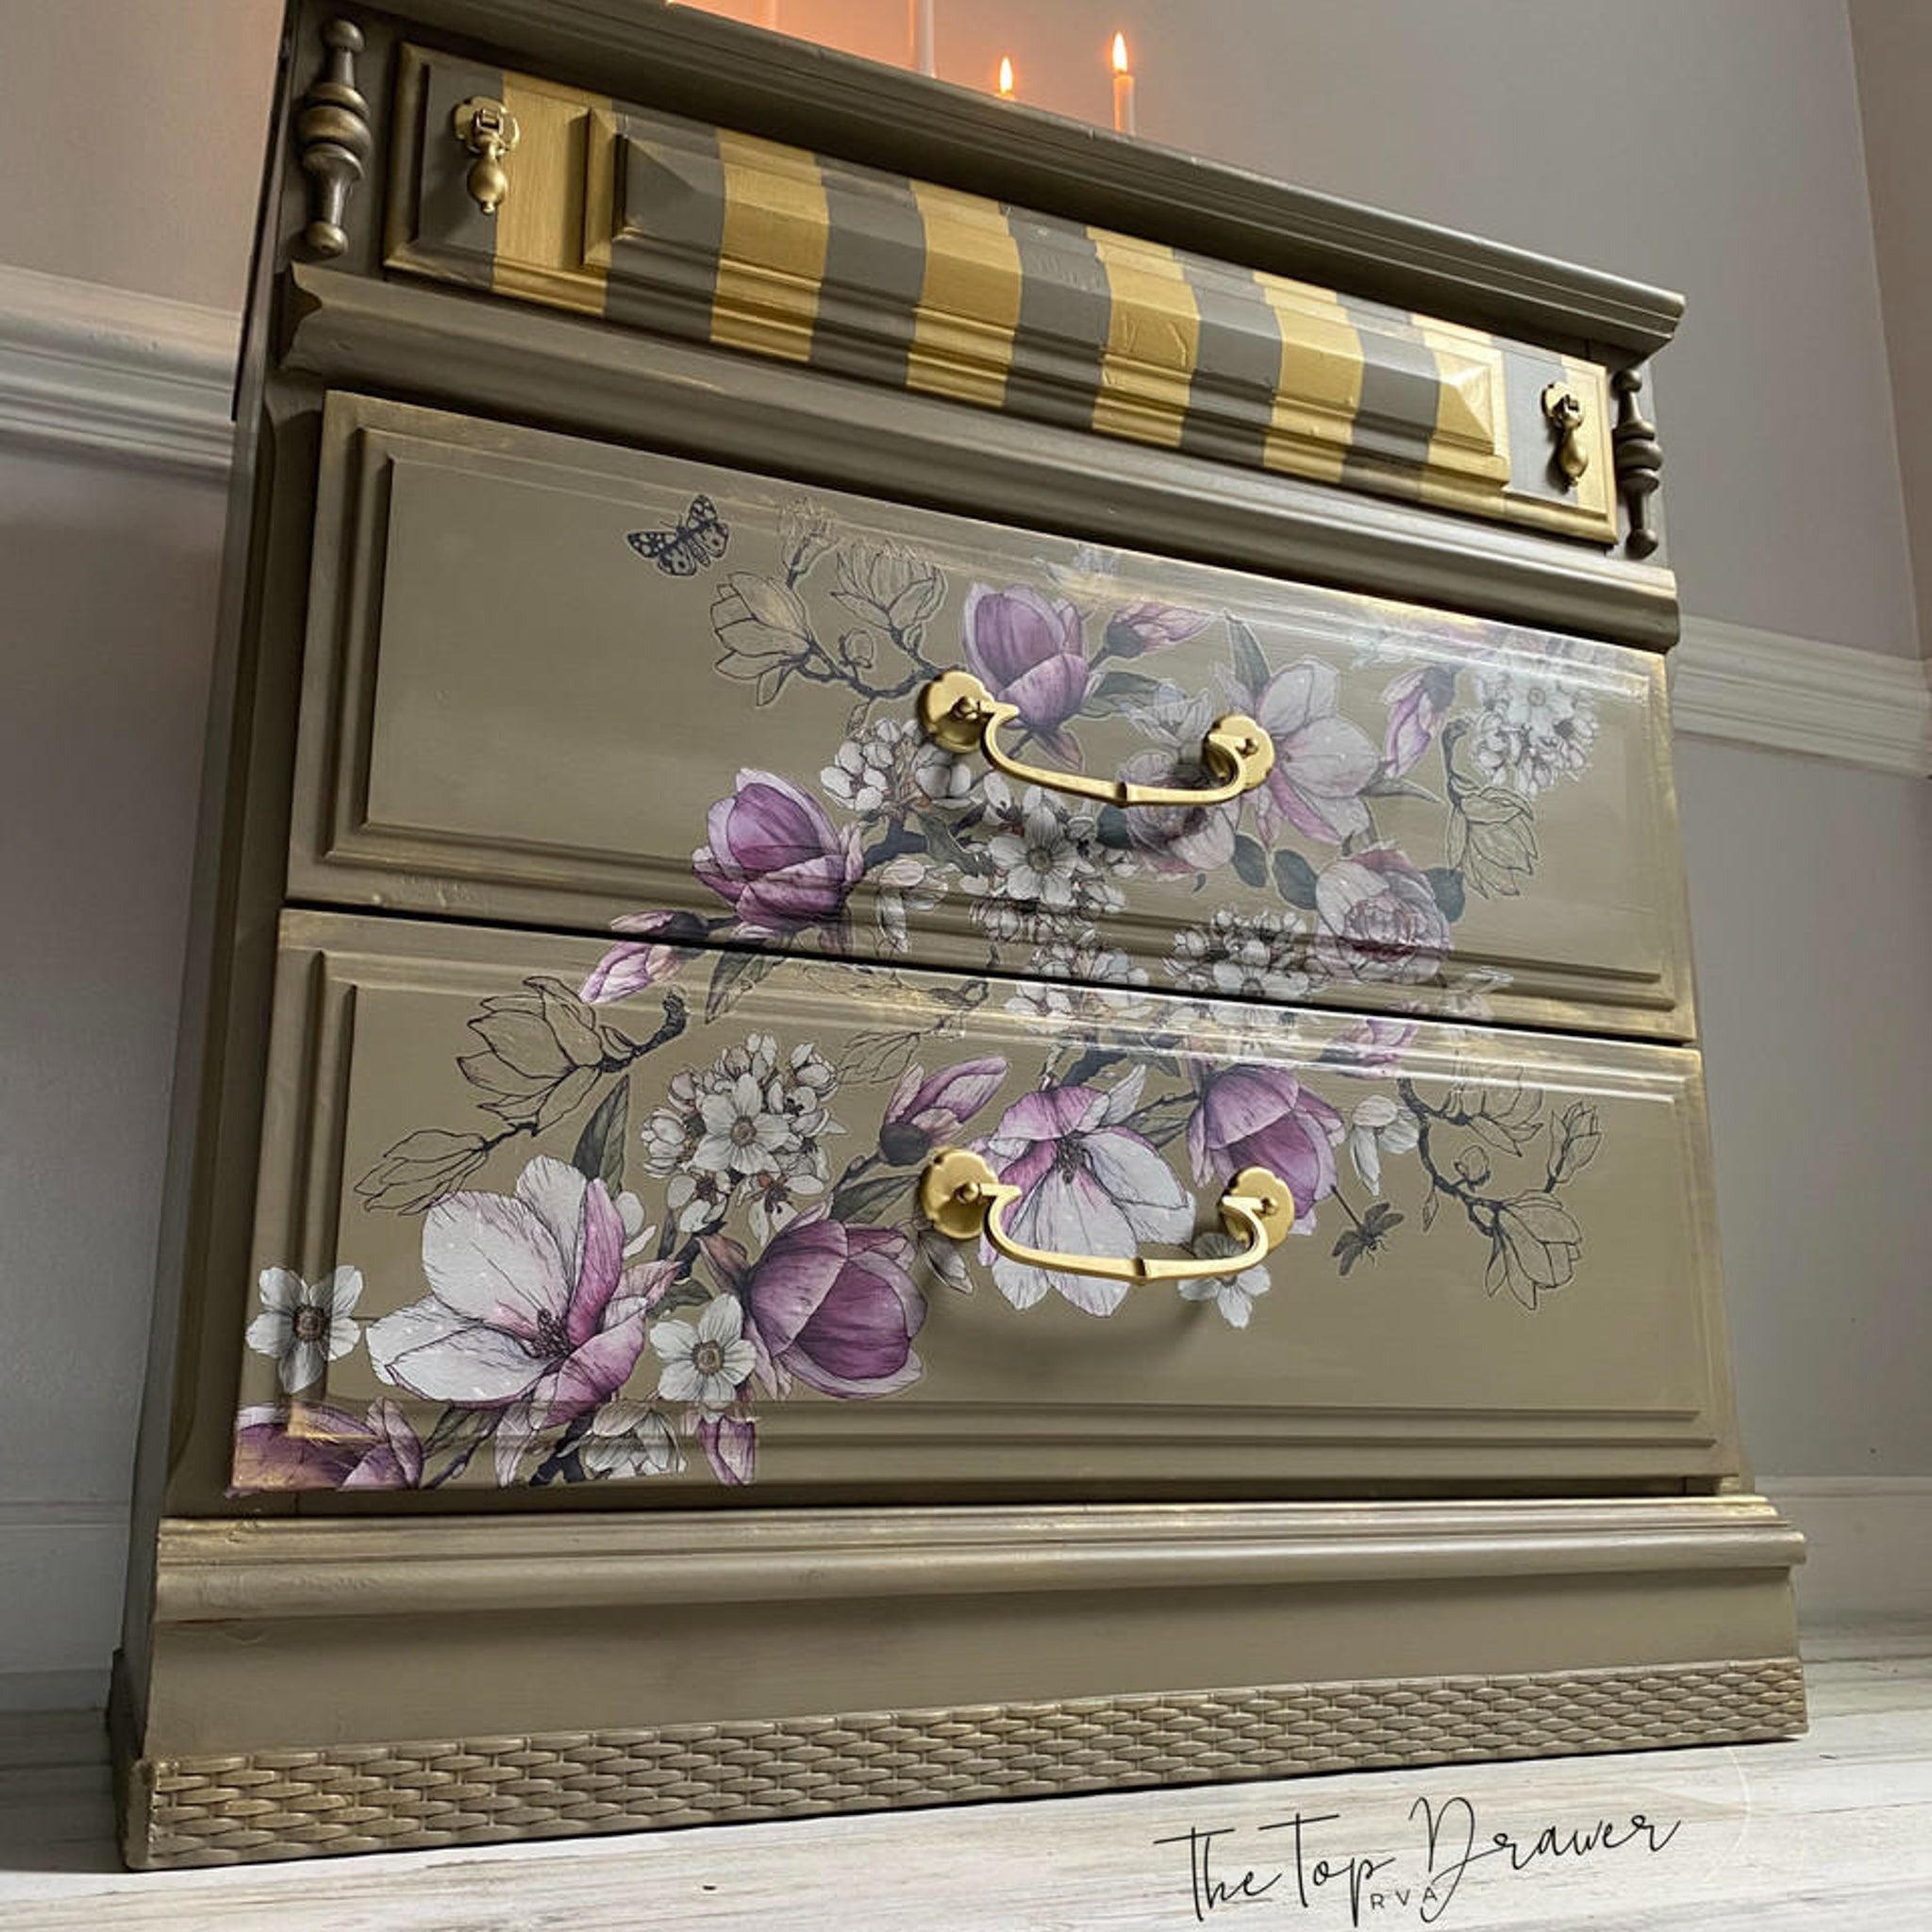 A vintage 3-drawer nightstand refurbished by The Top Drawer is painted a sage brown with gold accents and features the Buds and Branches transfer on its 2 bottom drawers.